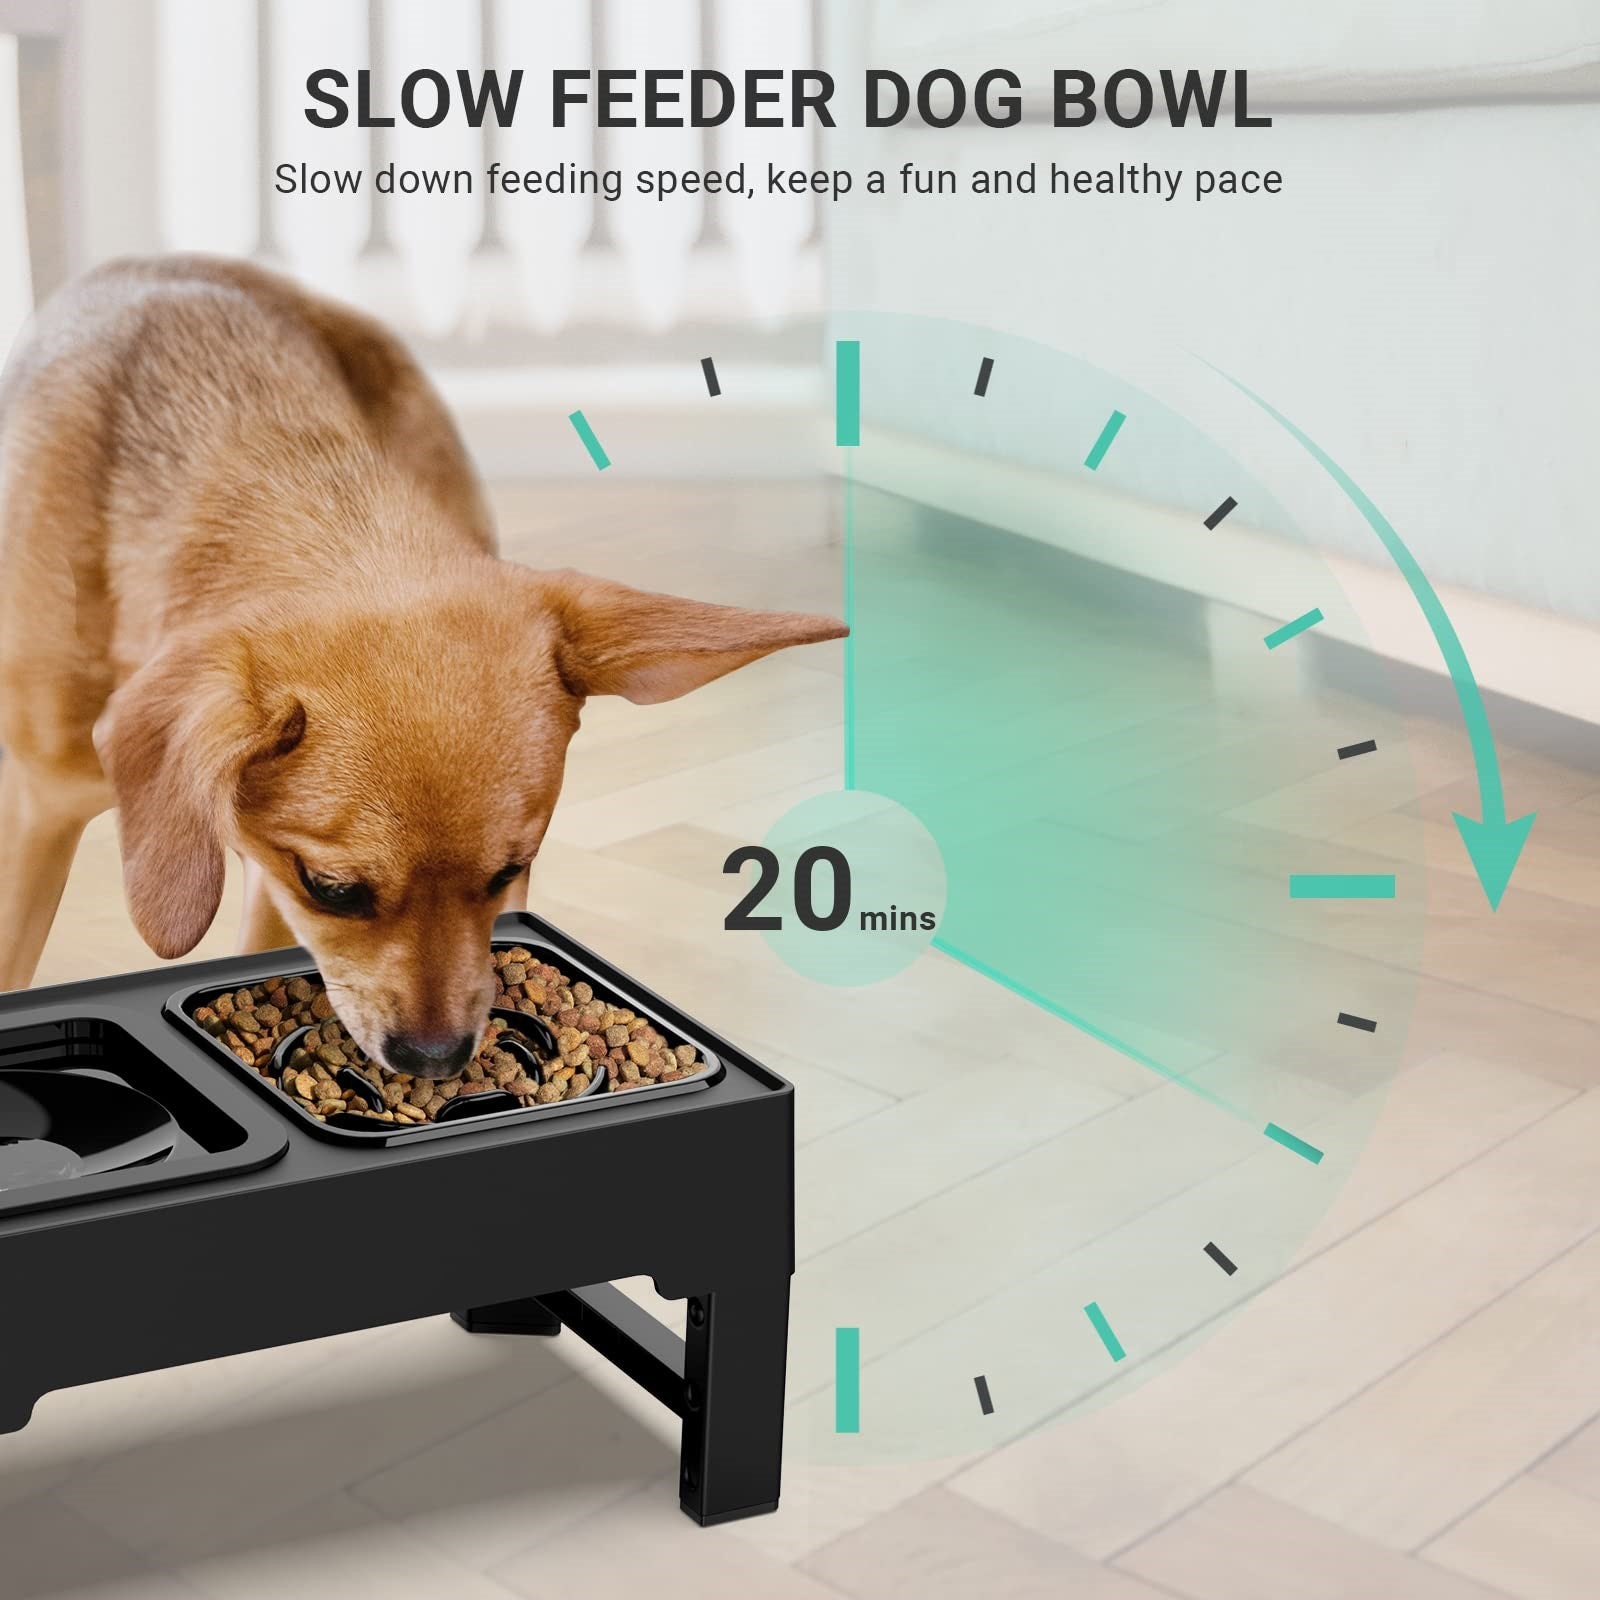 Should I Be Using An Elevated Bowl To Feed My Dog?